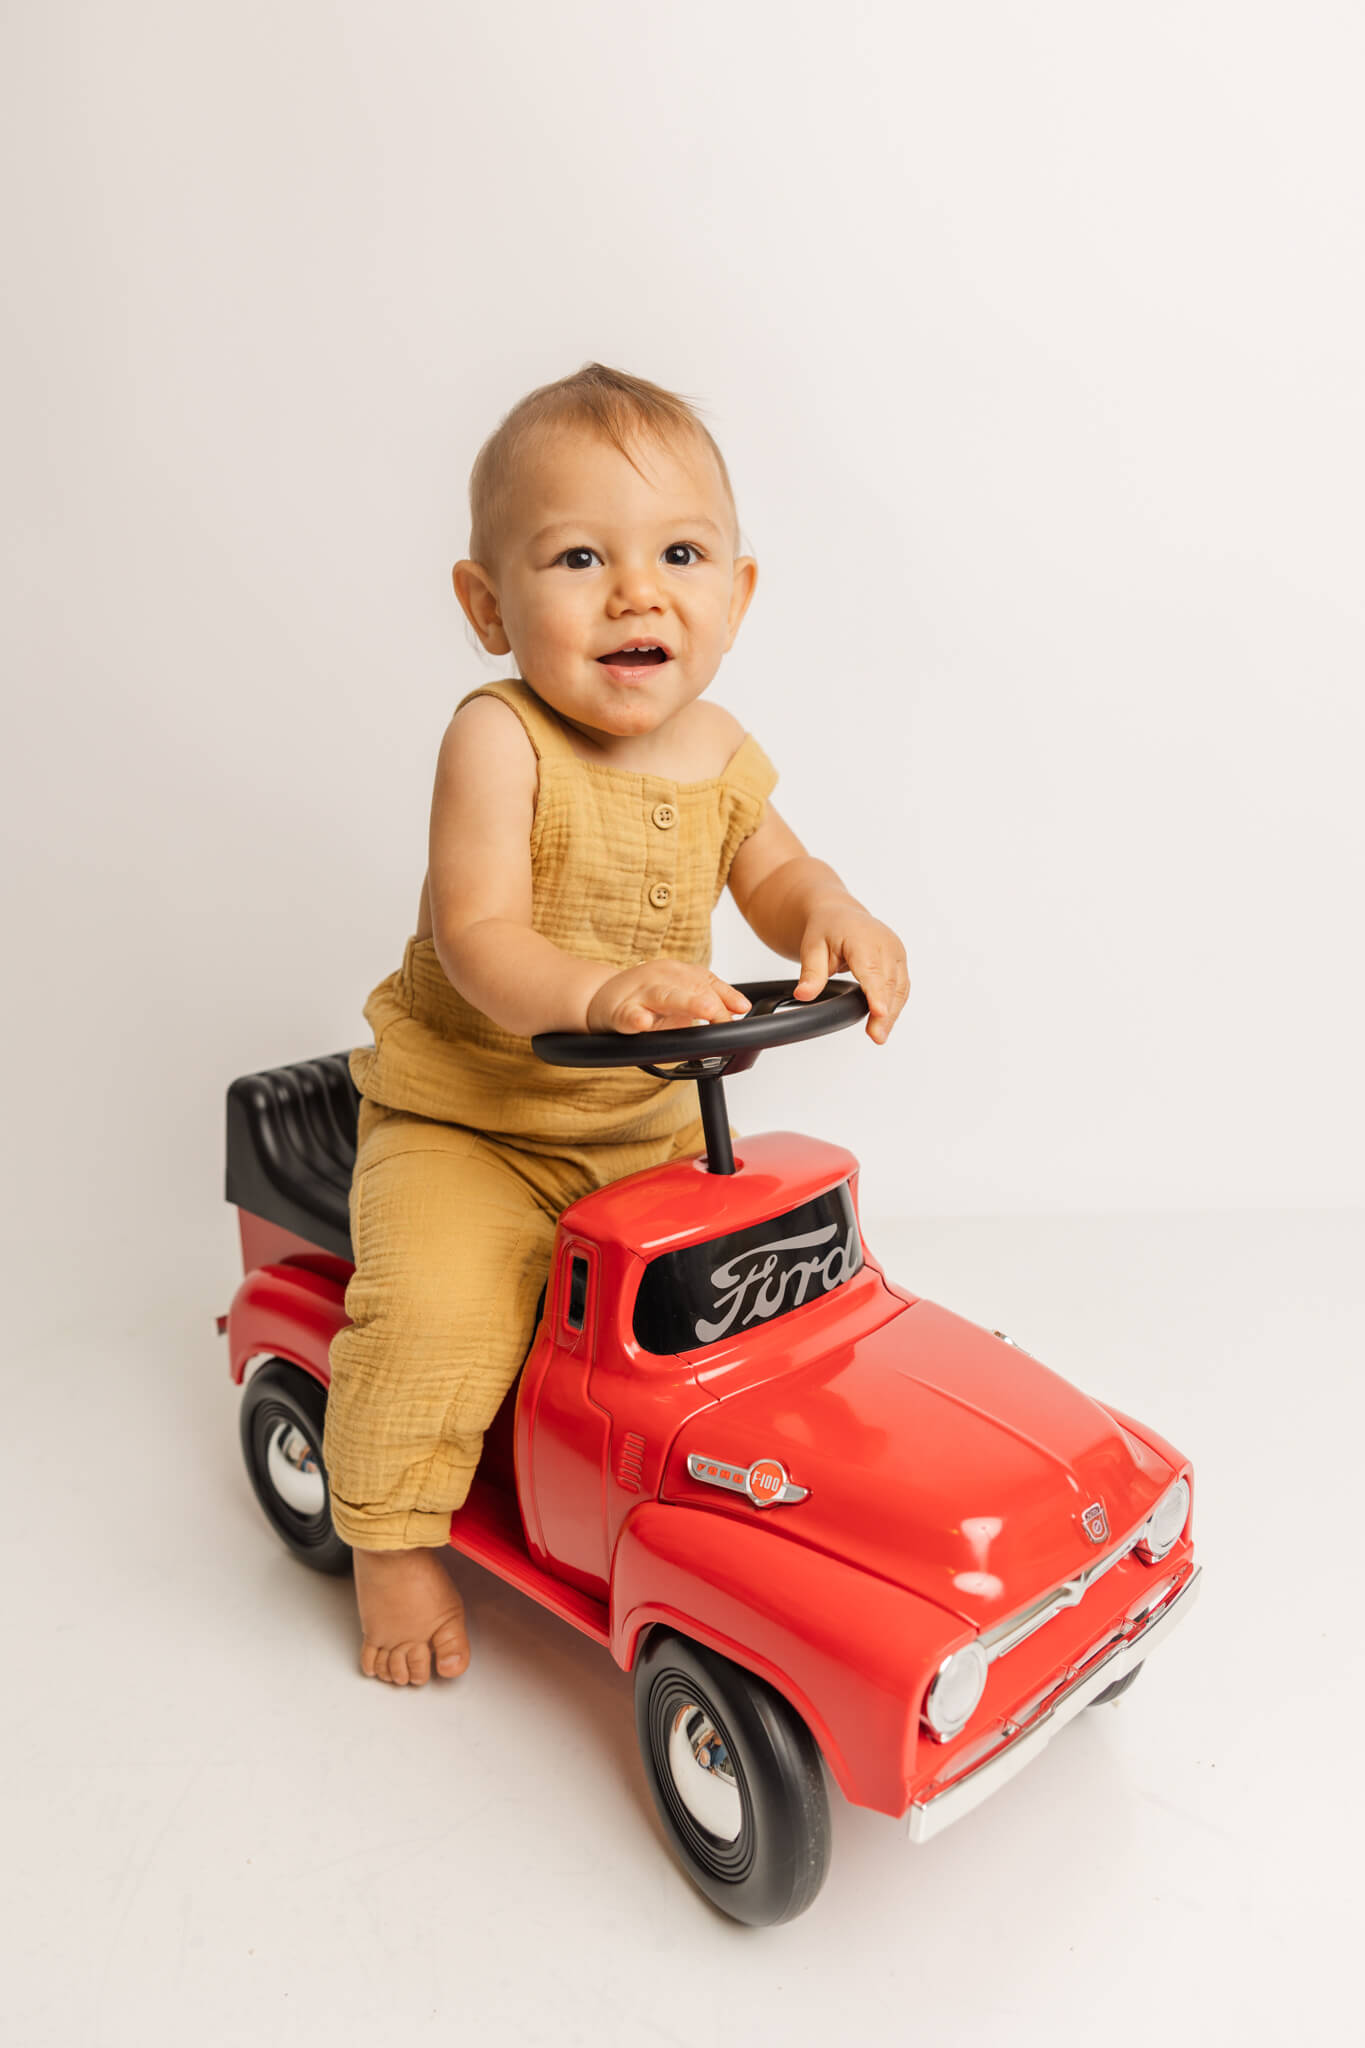 One year old on red truck